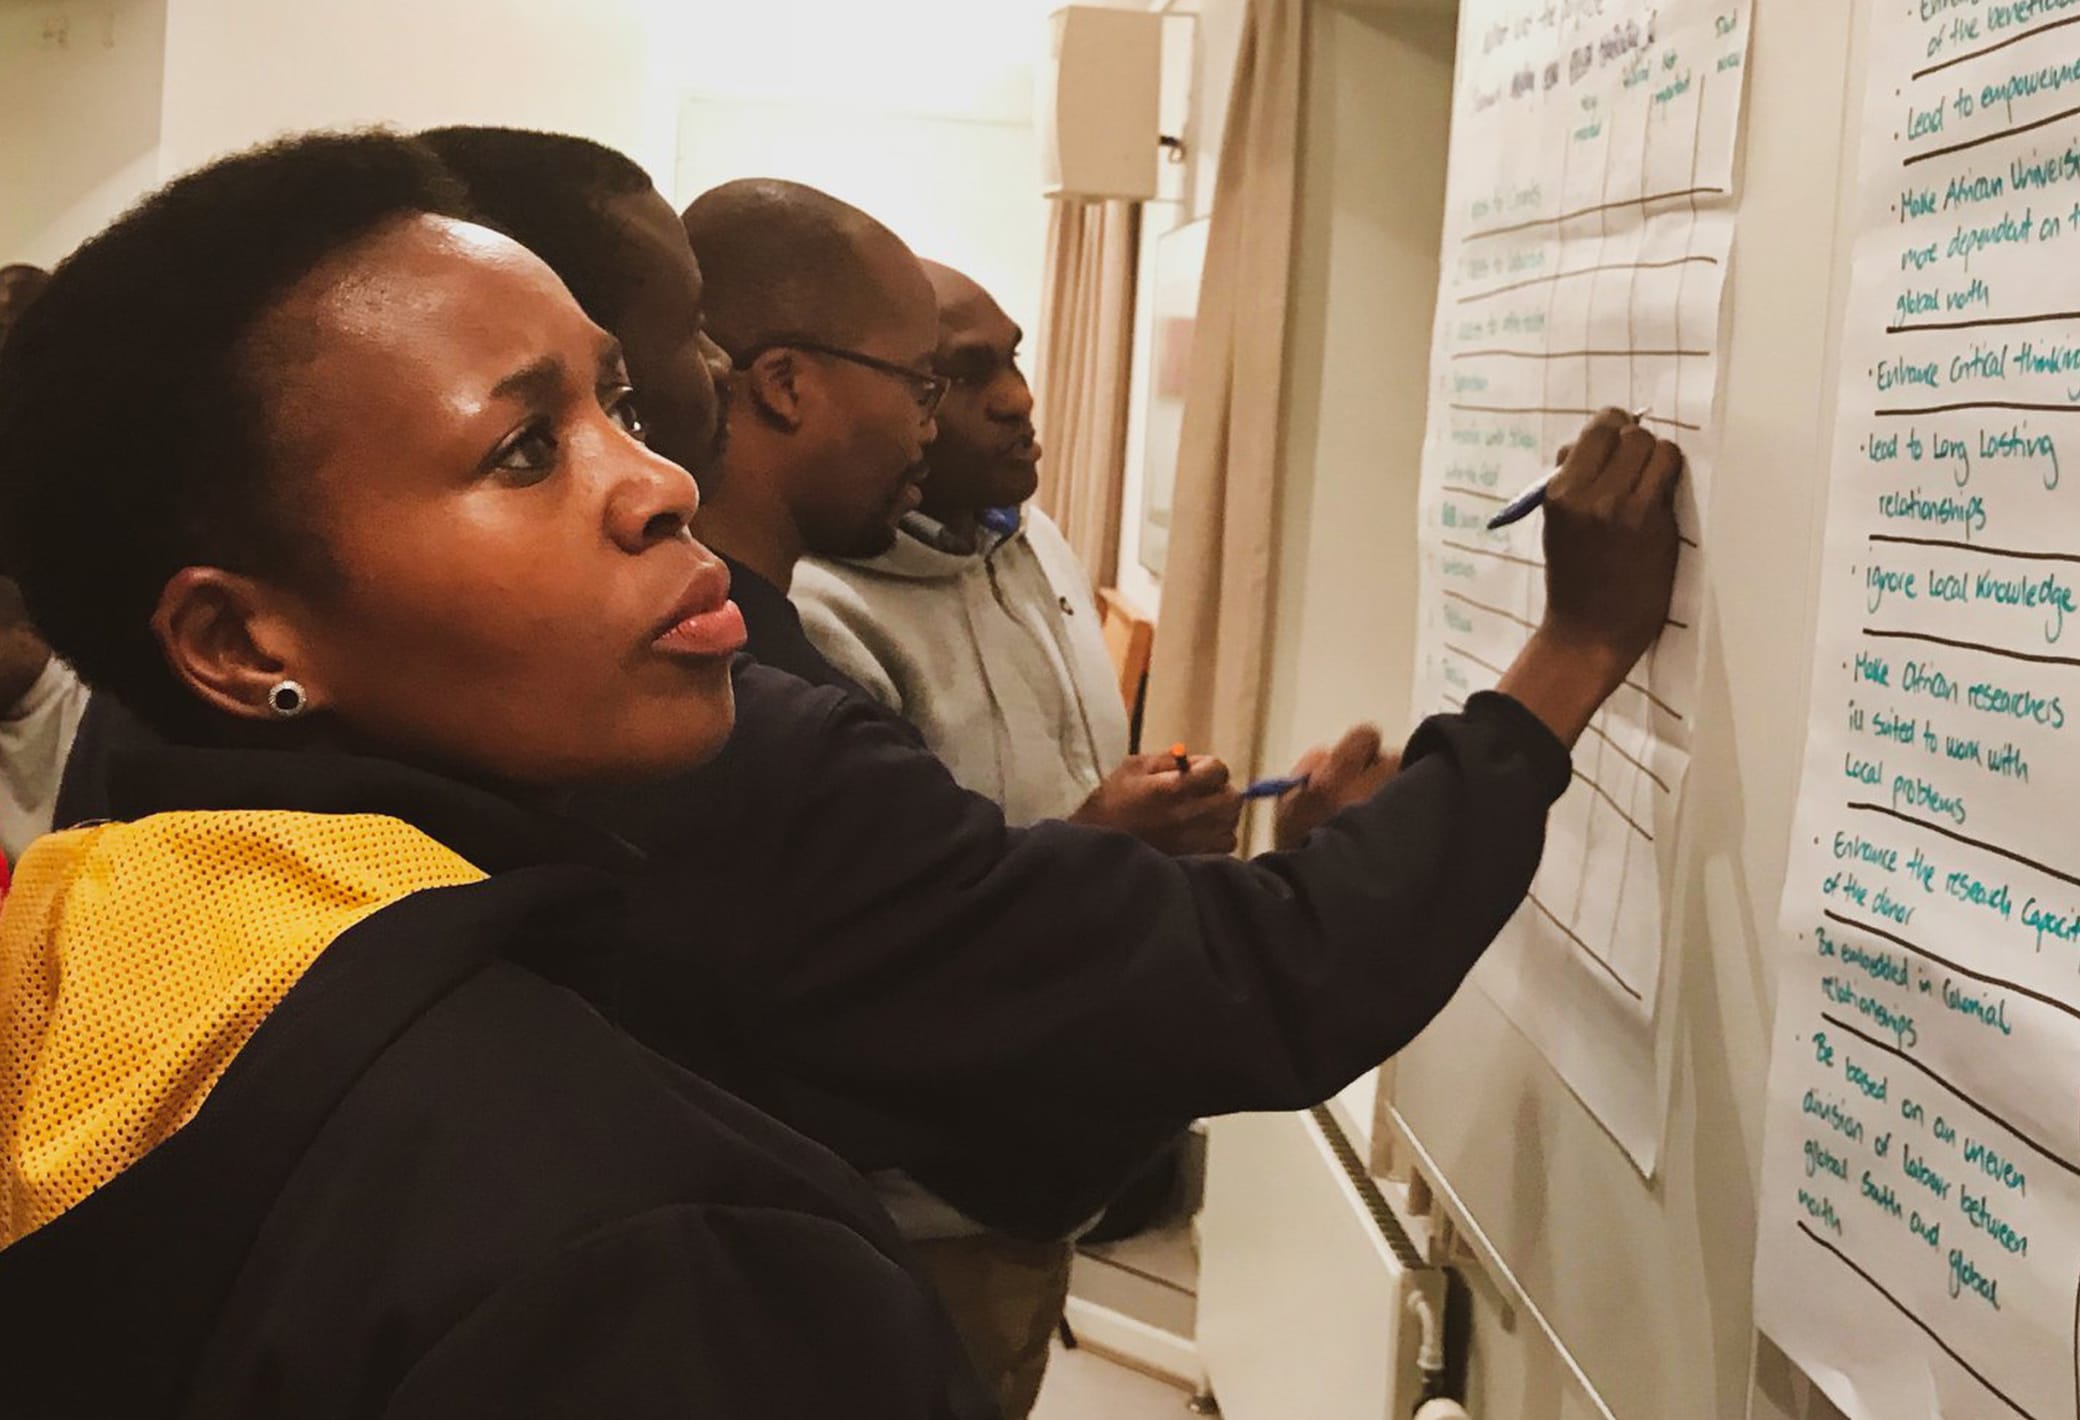 45 African Danida fellows attended a workshop on 5 November 2018 at Danida Fellowship Centre to discuss the opportunities and challenges for Danida fellows including notions of empowerment and the purpose of going to Denmark. Photo: Vibeke Quaade 